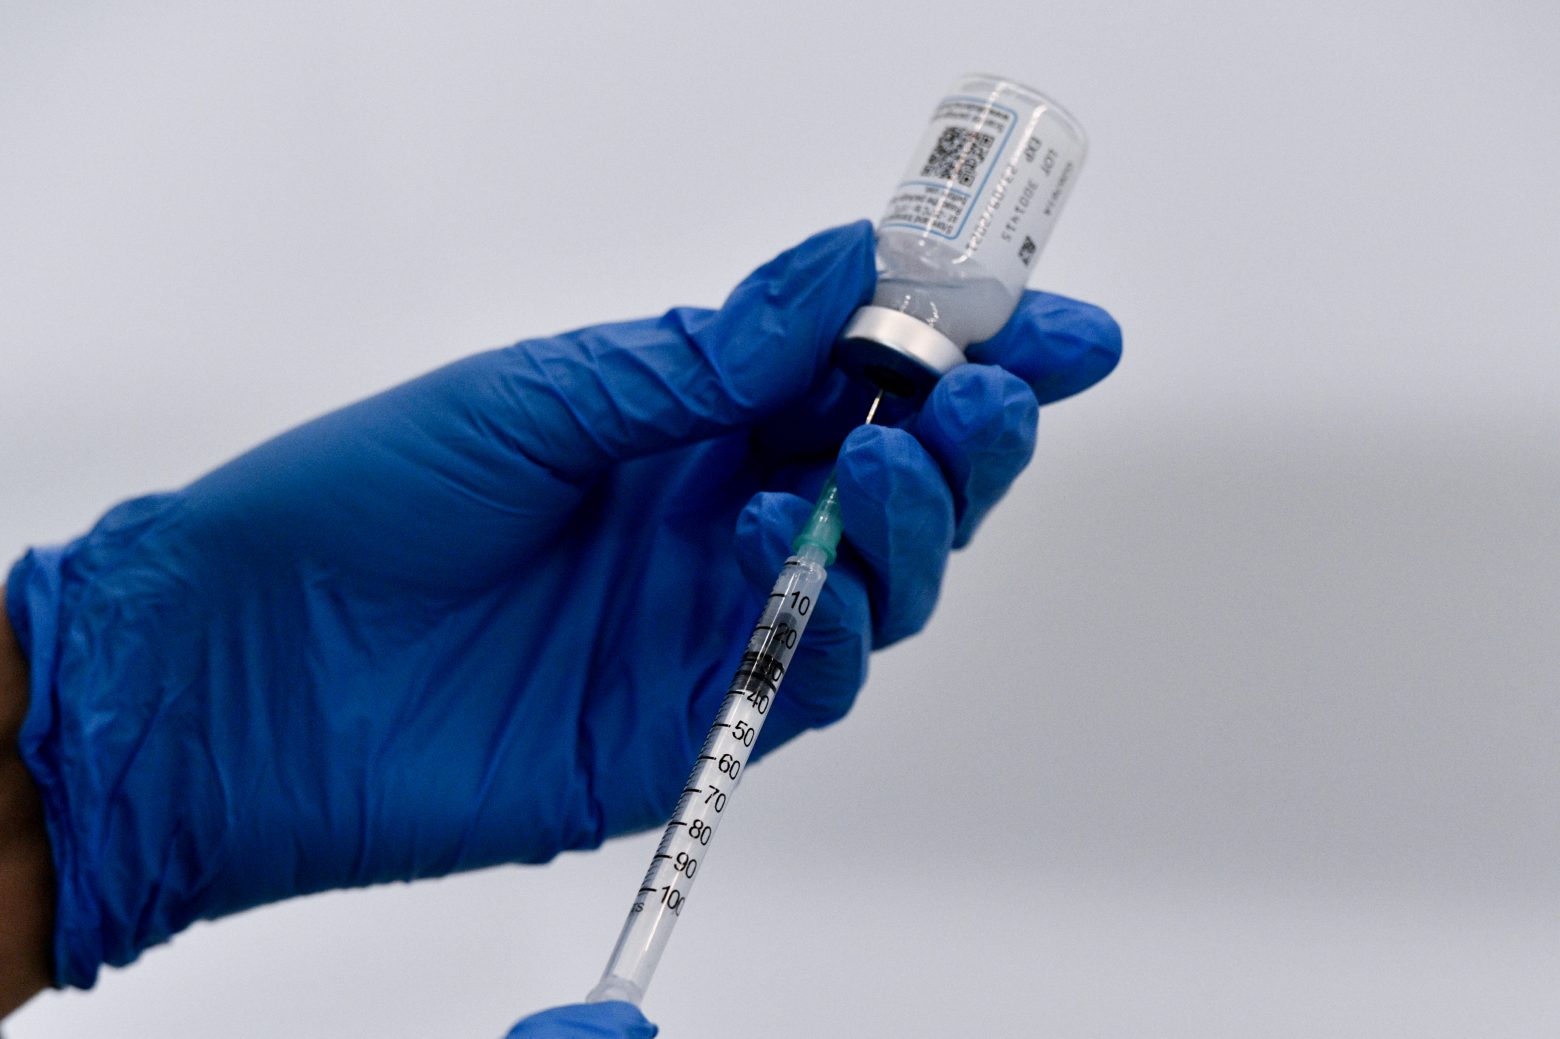 Greek high court upholds obligatory Covid-19 vaccinations law for healthcare staff